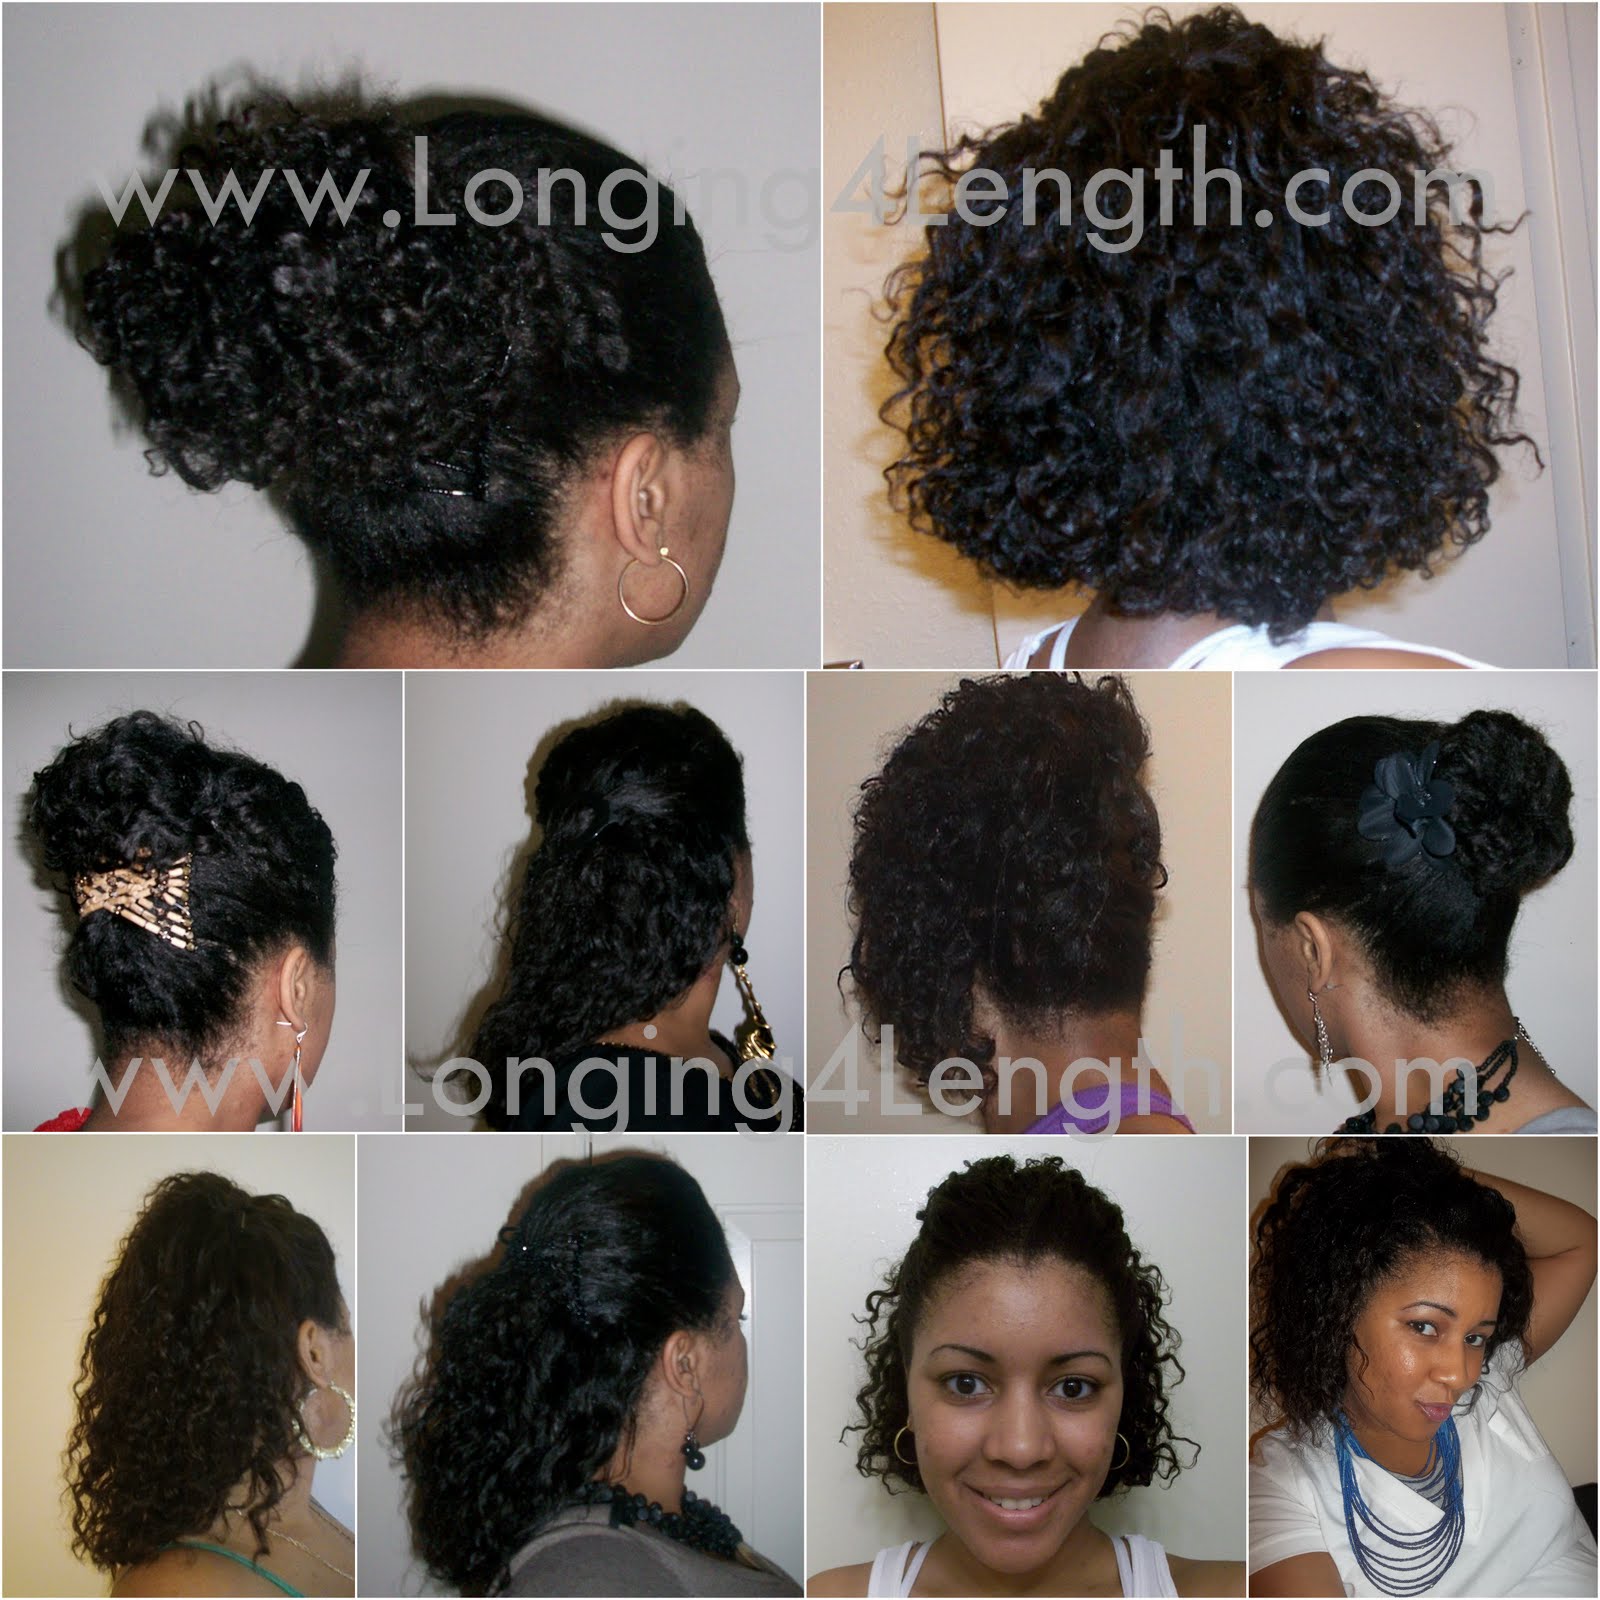 How To Save A Busted Braidout Longing 4 Length